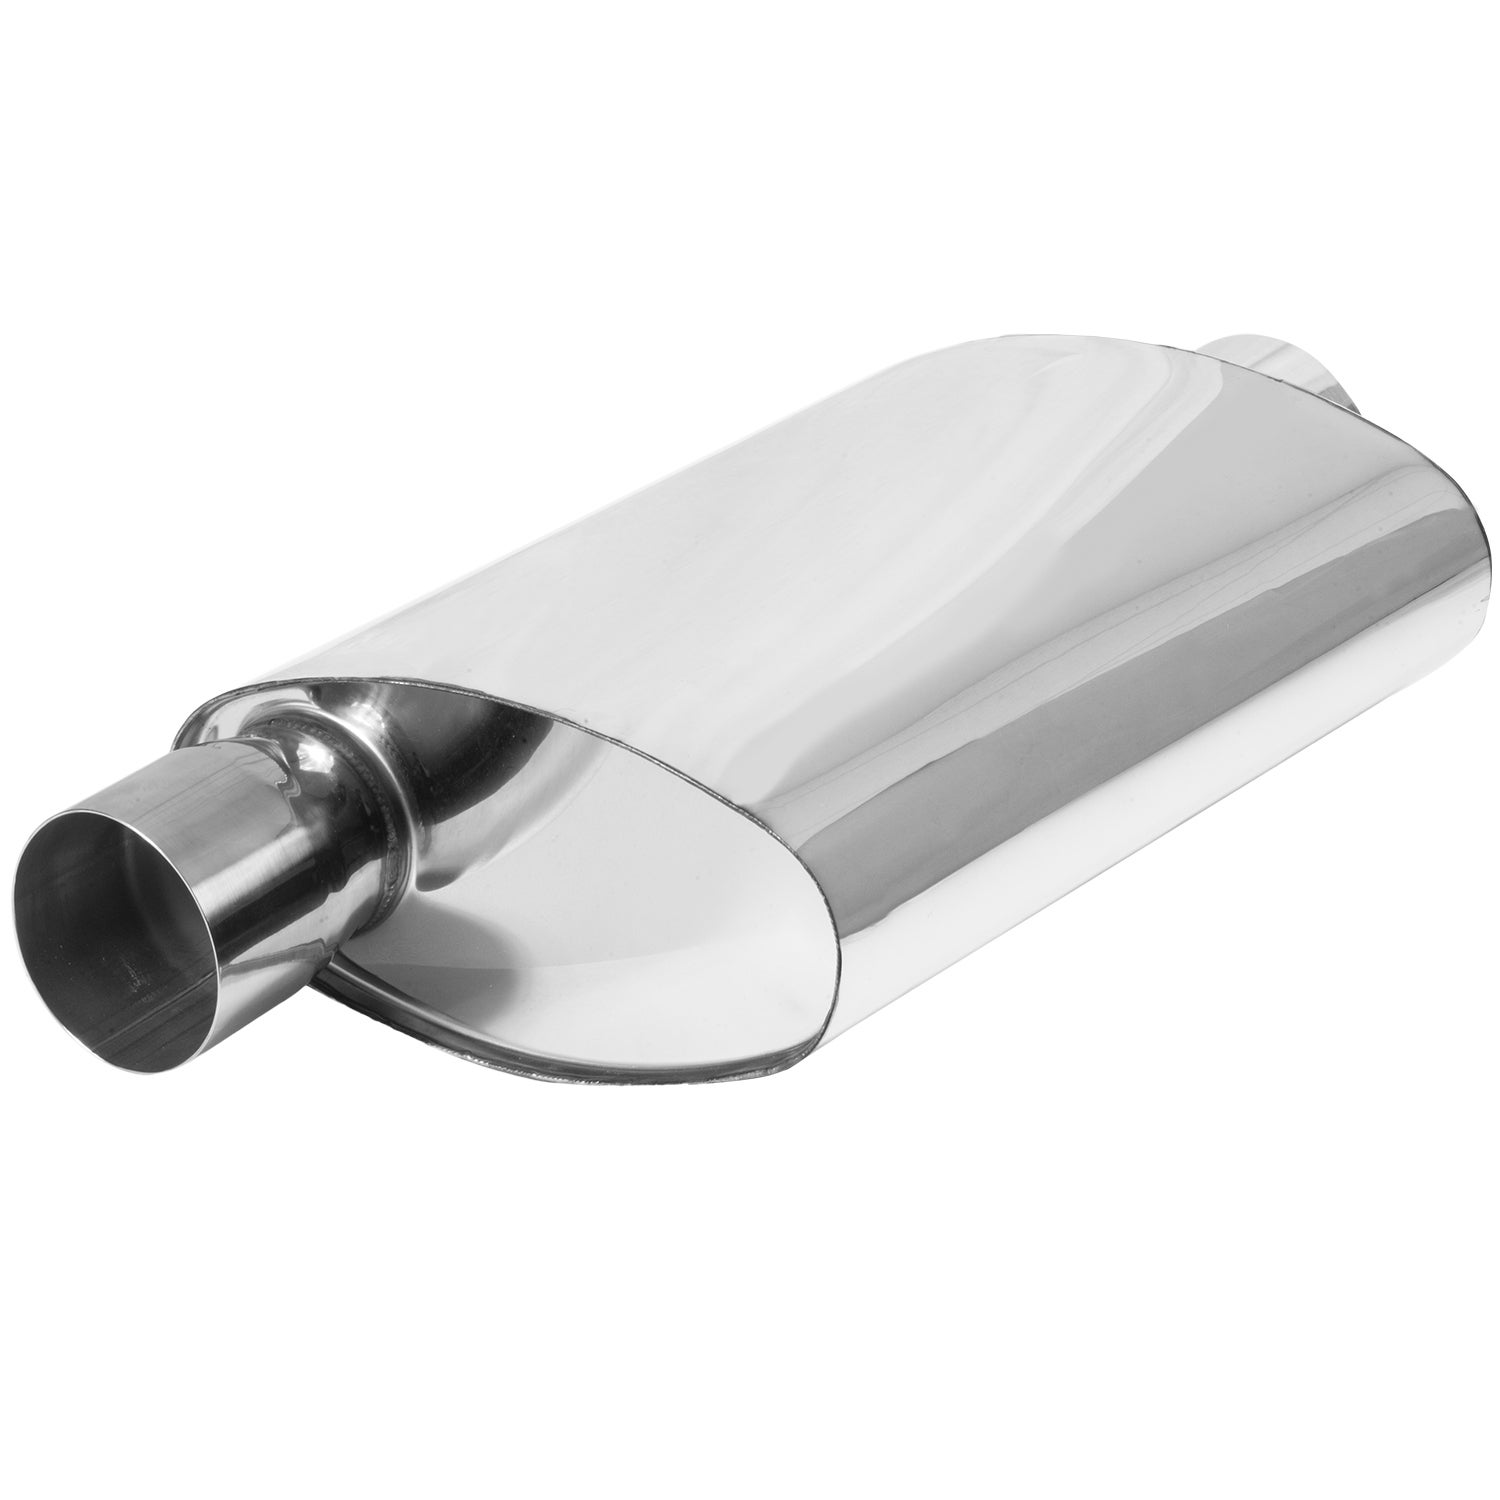 Proflow Muffler Oval 409 Stainless Steel Polished Flow Chamber 3in. Side Inlet T